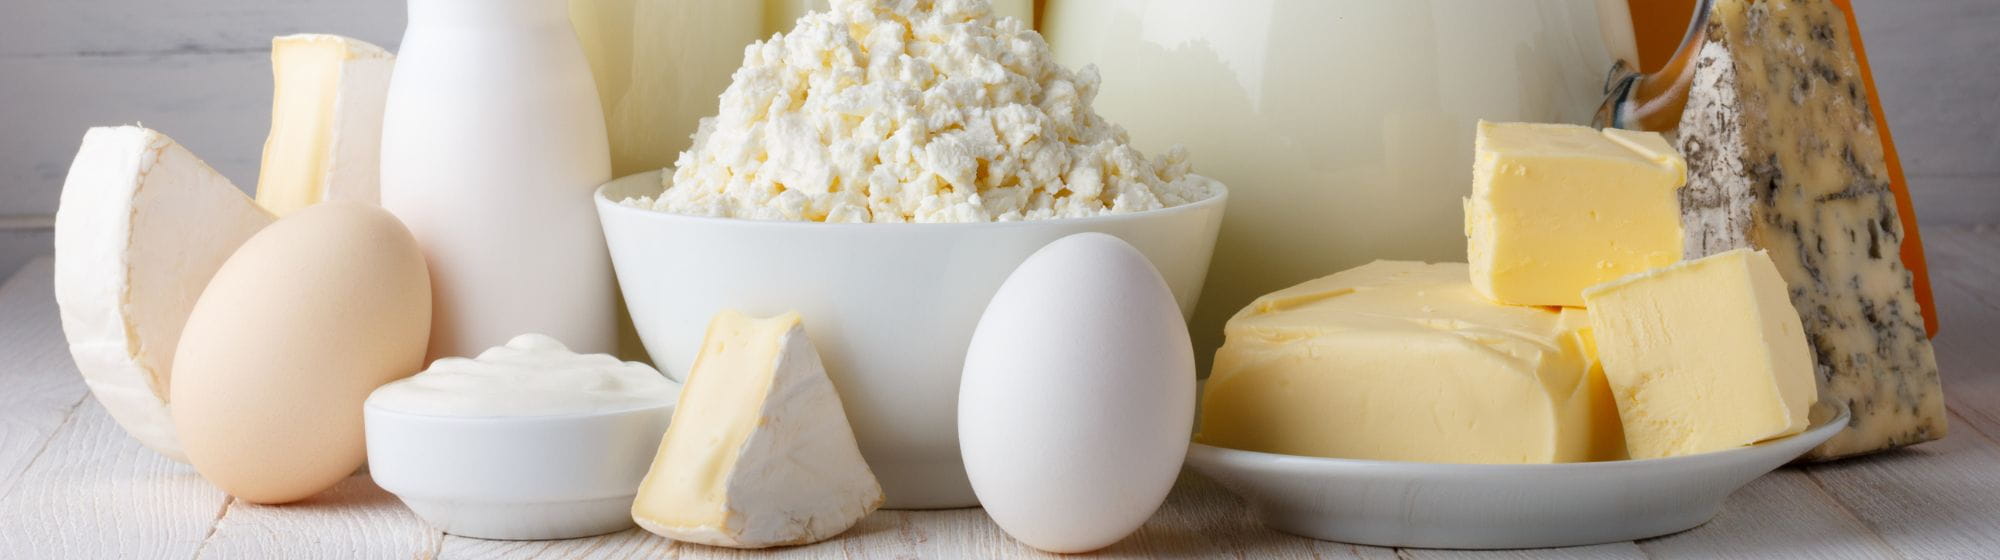 Many dairy products on a plate such as eggs, cheese and so 